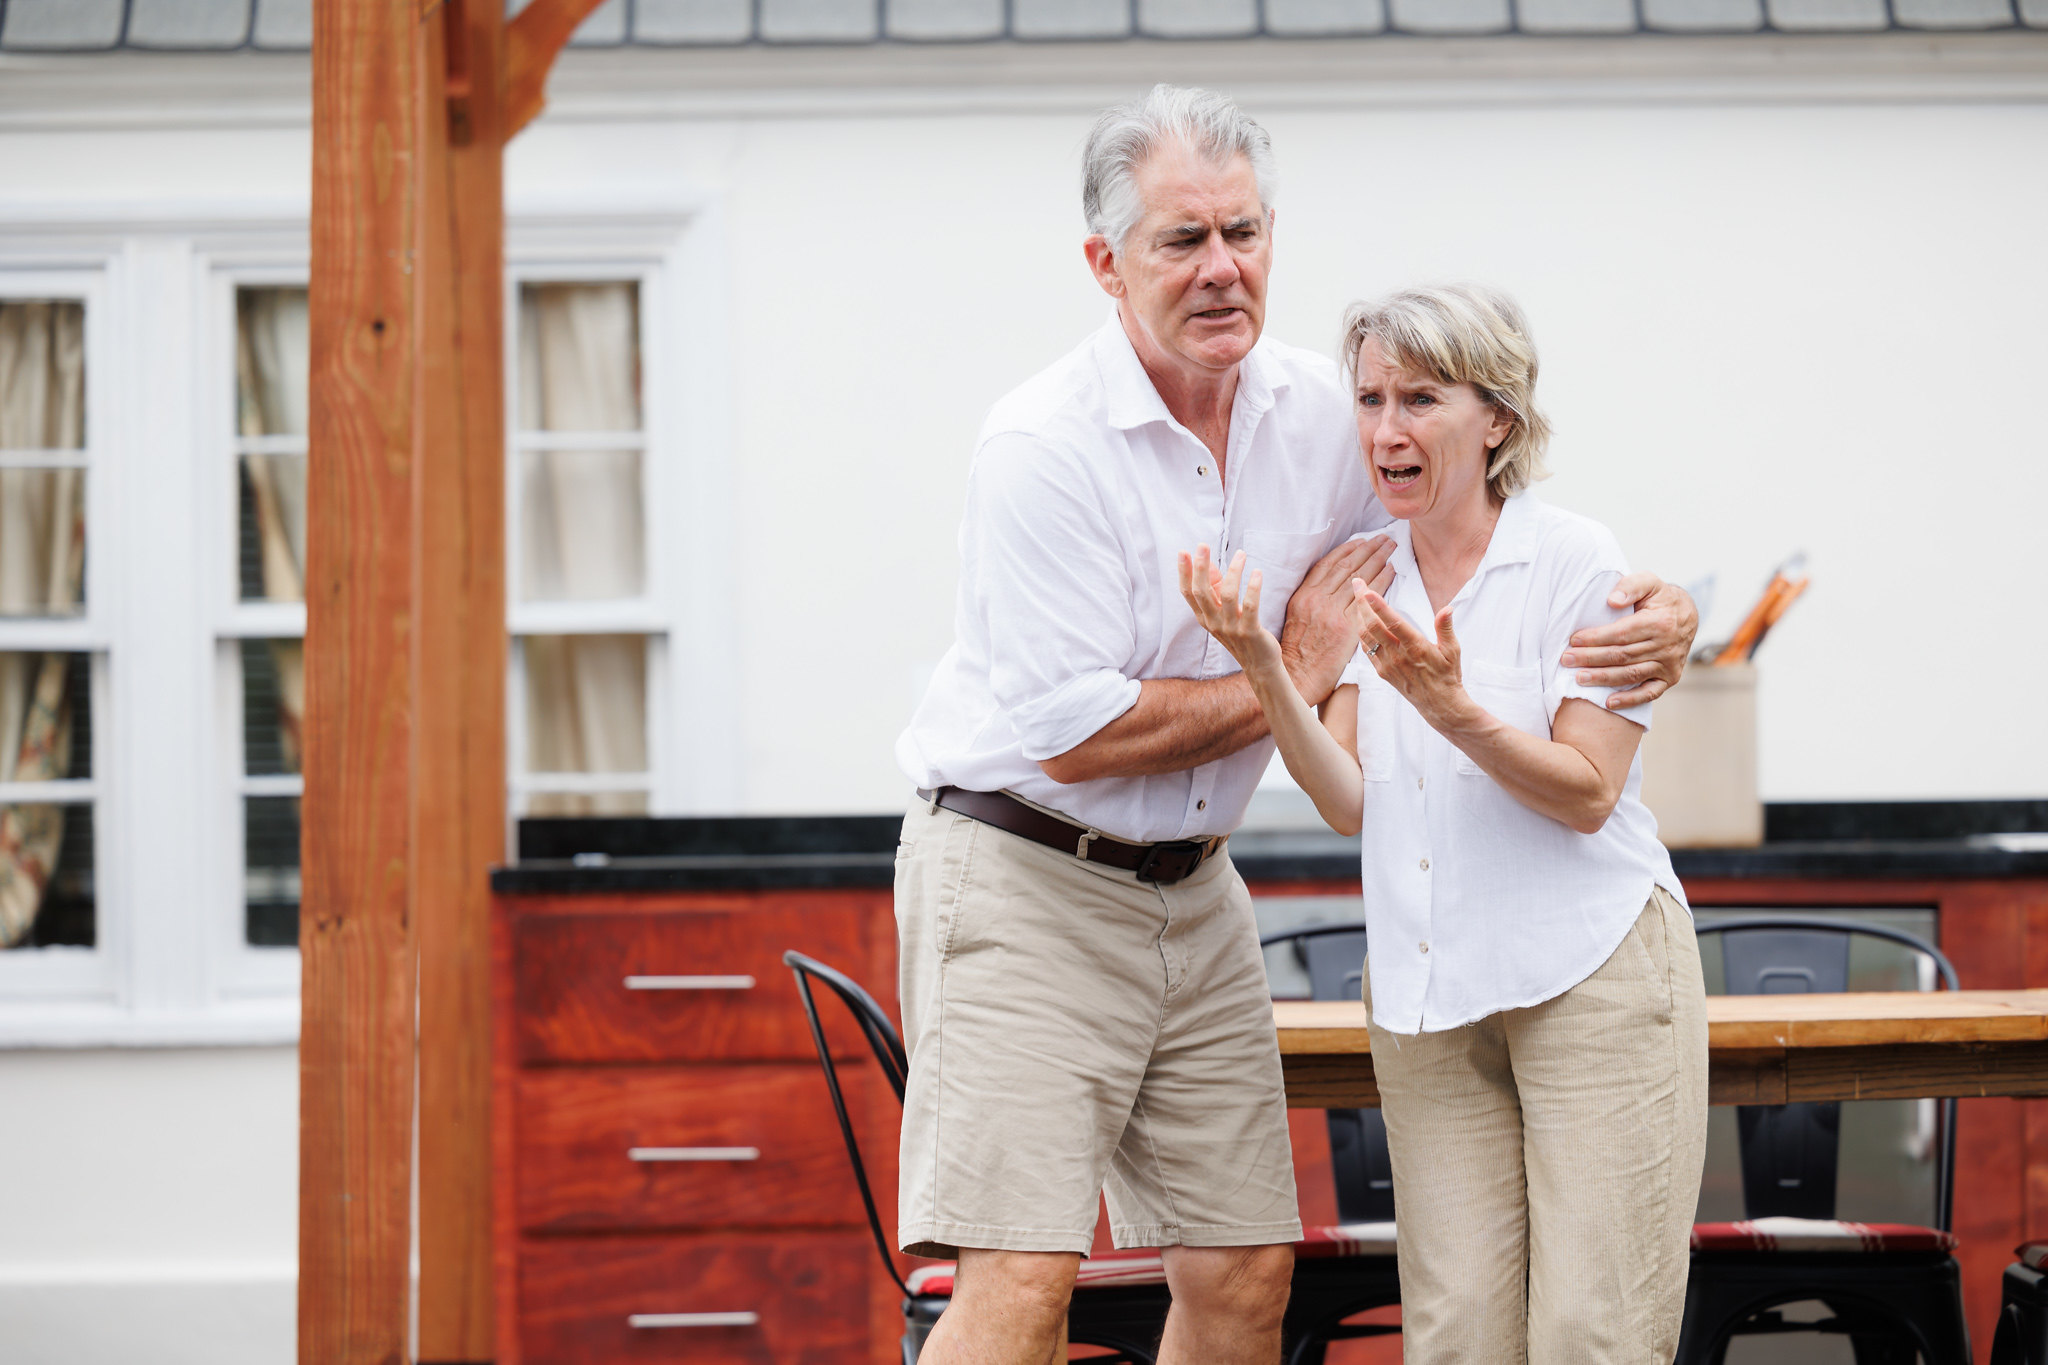 Kevin O'Rourke and Bella Merlin, portraying Moss and Avis in "A Body of Water," stand close together in a moment of intense emotion. O'Rourke has his arm around Merlin, who appears distressed and is gesturing with her hands. Both are dressed in white shirts and beige shorts. The background features part of the house with a window and an outdoor kitchen area, emphasizing the domestic yet unsettling setting of the scene.